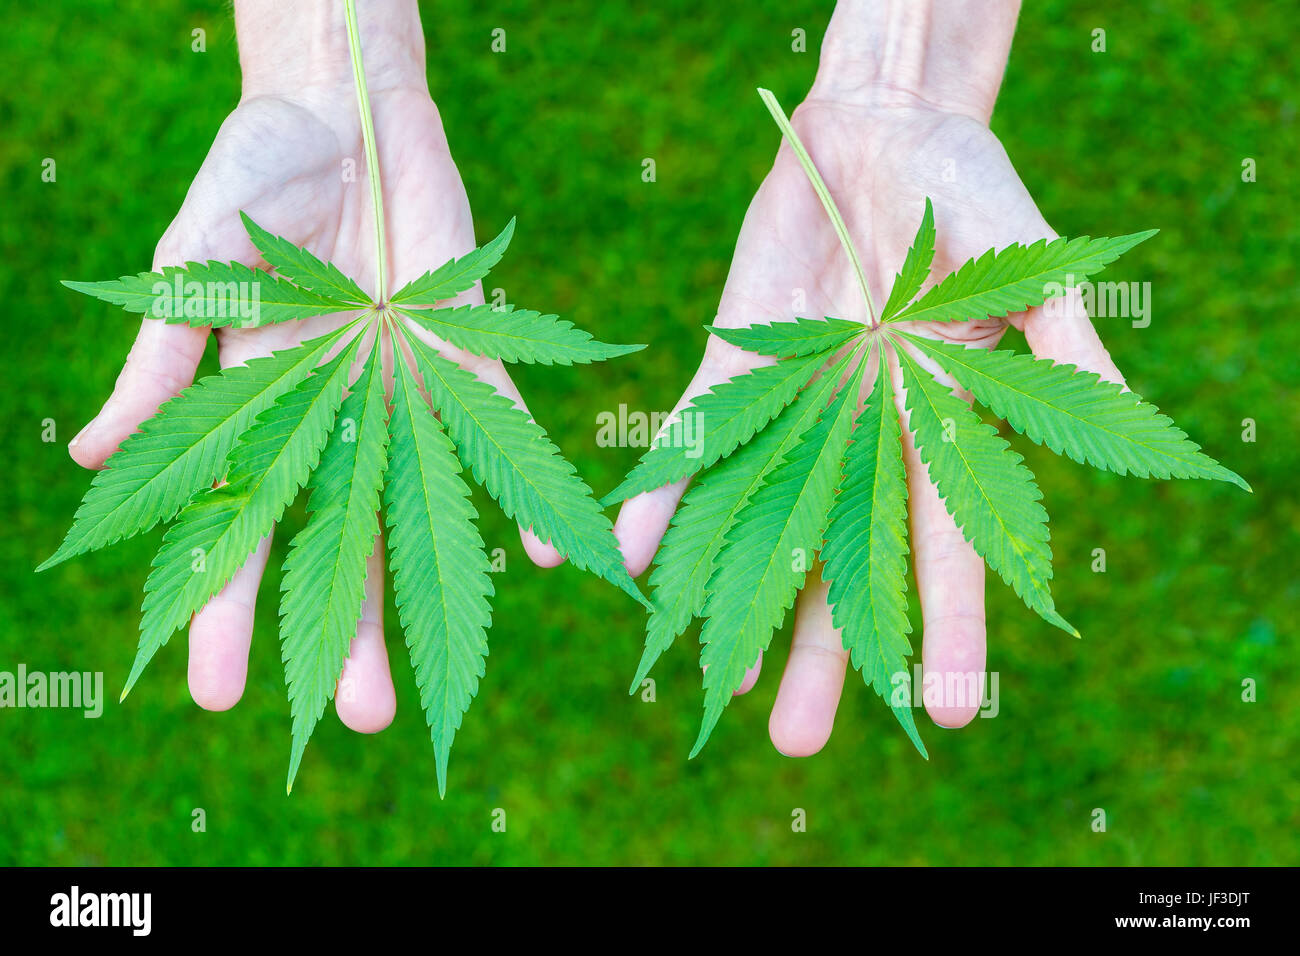 Two hands holding hemp leaves above grass Stock Photo